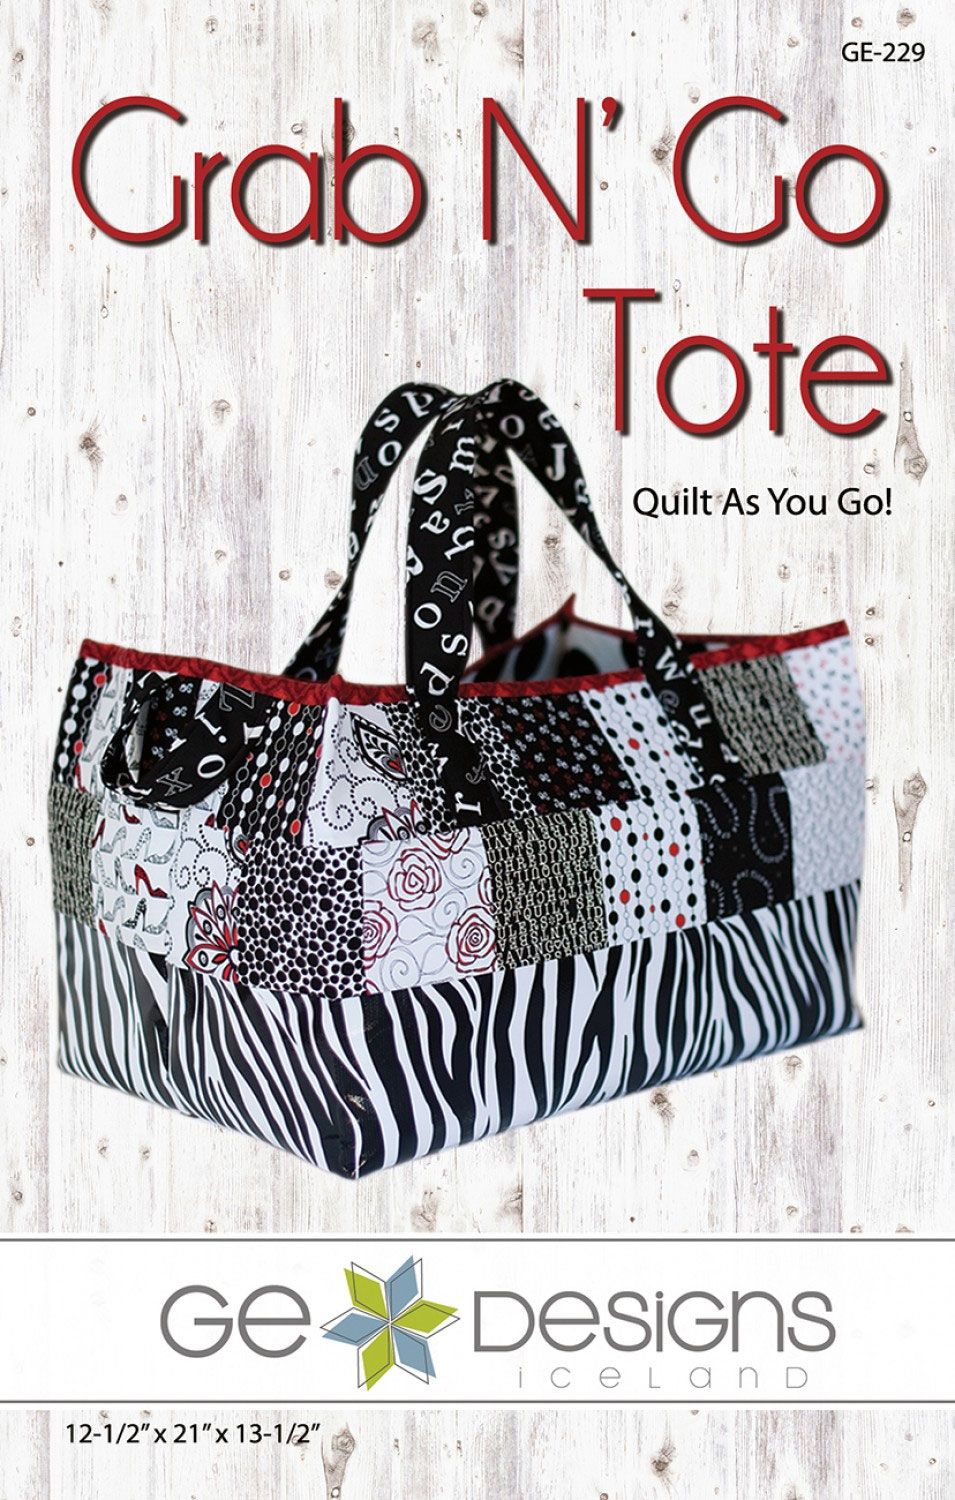 Grab-and-Go-Tote-sewing-pattern-GE-Designs-front